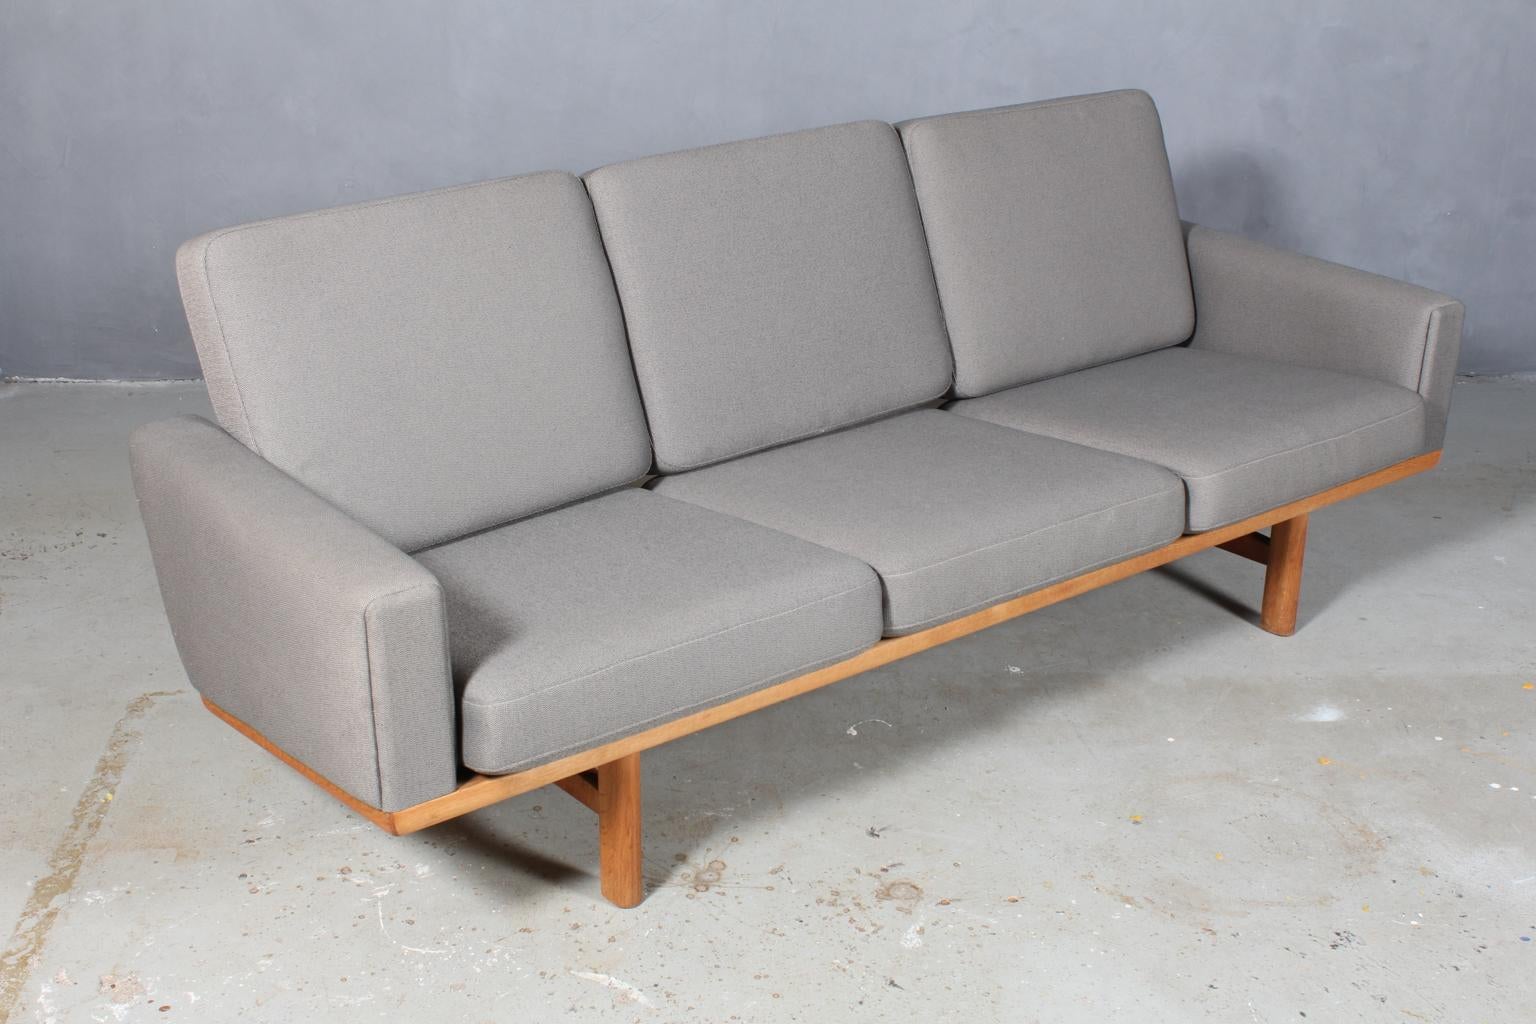 Hans J. Wegner three-seater sofa new upholstered with kvadrat upholstery.

Original Epeda cushions.

Frame in solid oak.

Model 236/3, produced by GETAMA.